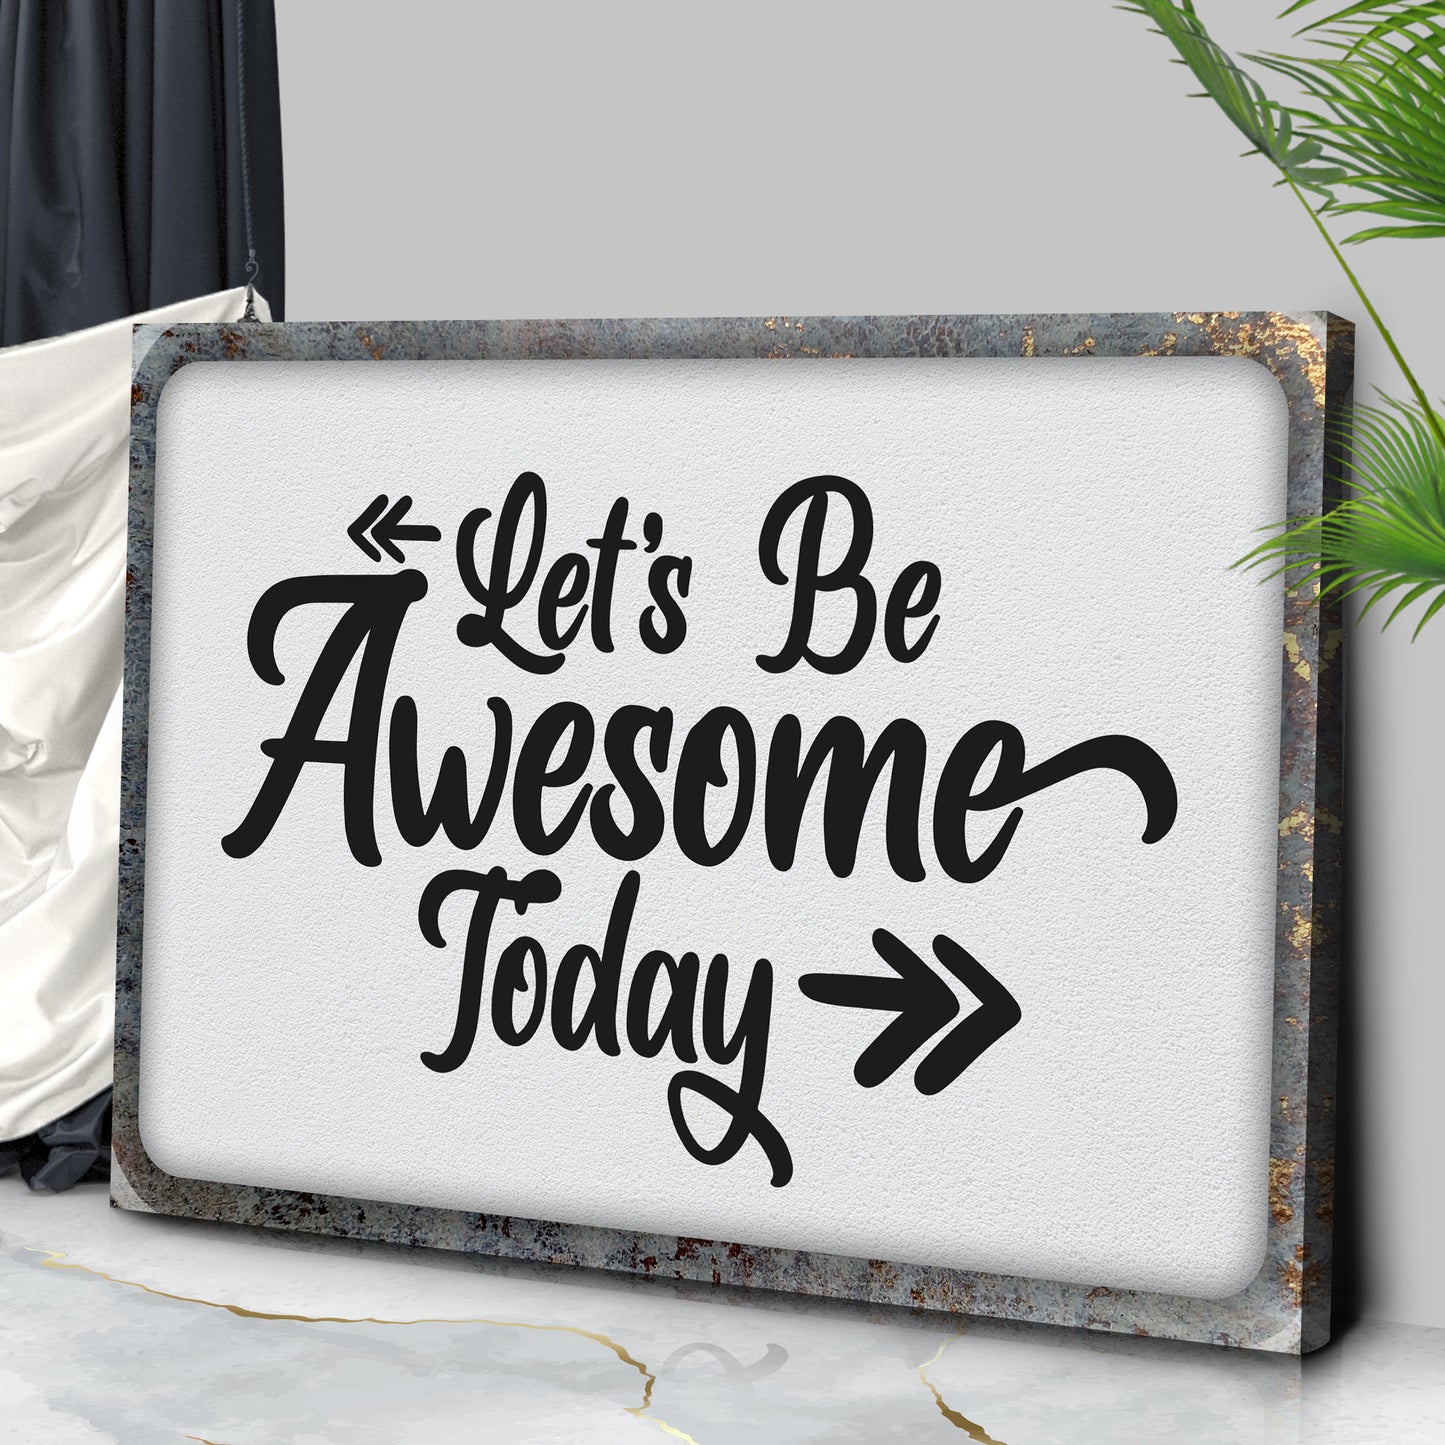 Let's Be Awesome Today Sign Style 2 - Image by Tailored Canvases